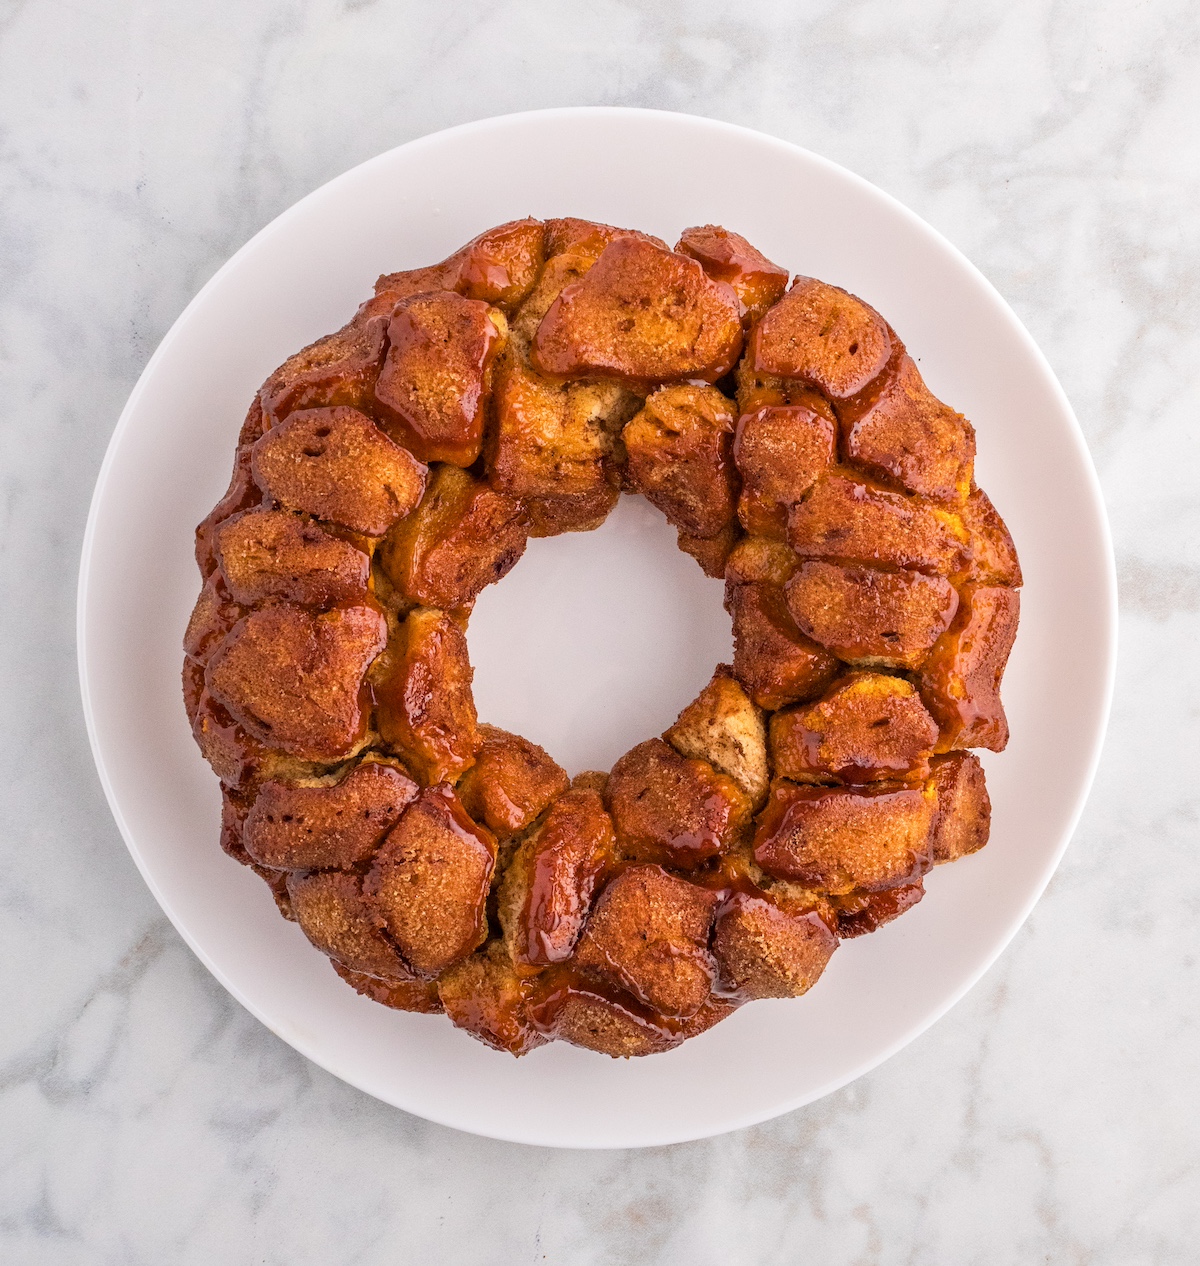 Monkey bread removed from the pan and on a plate